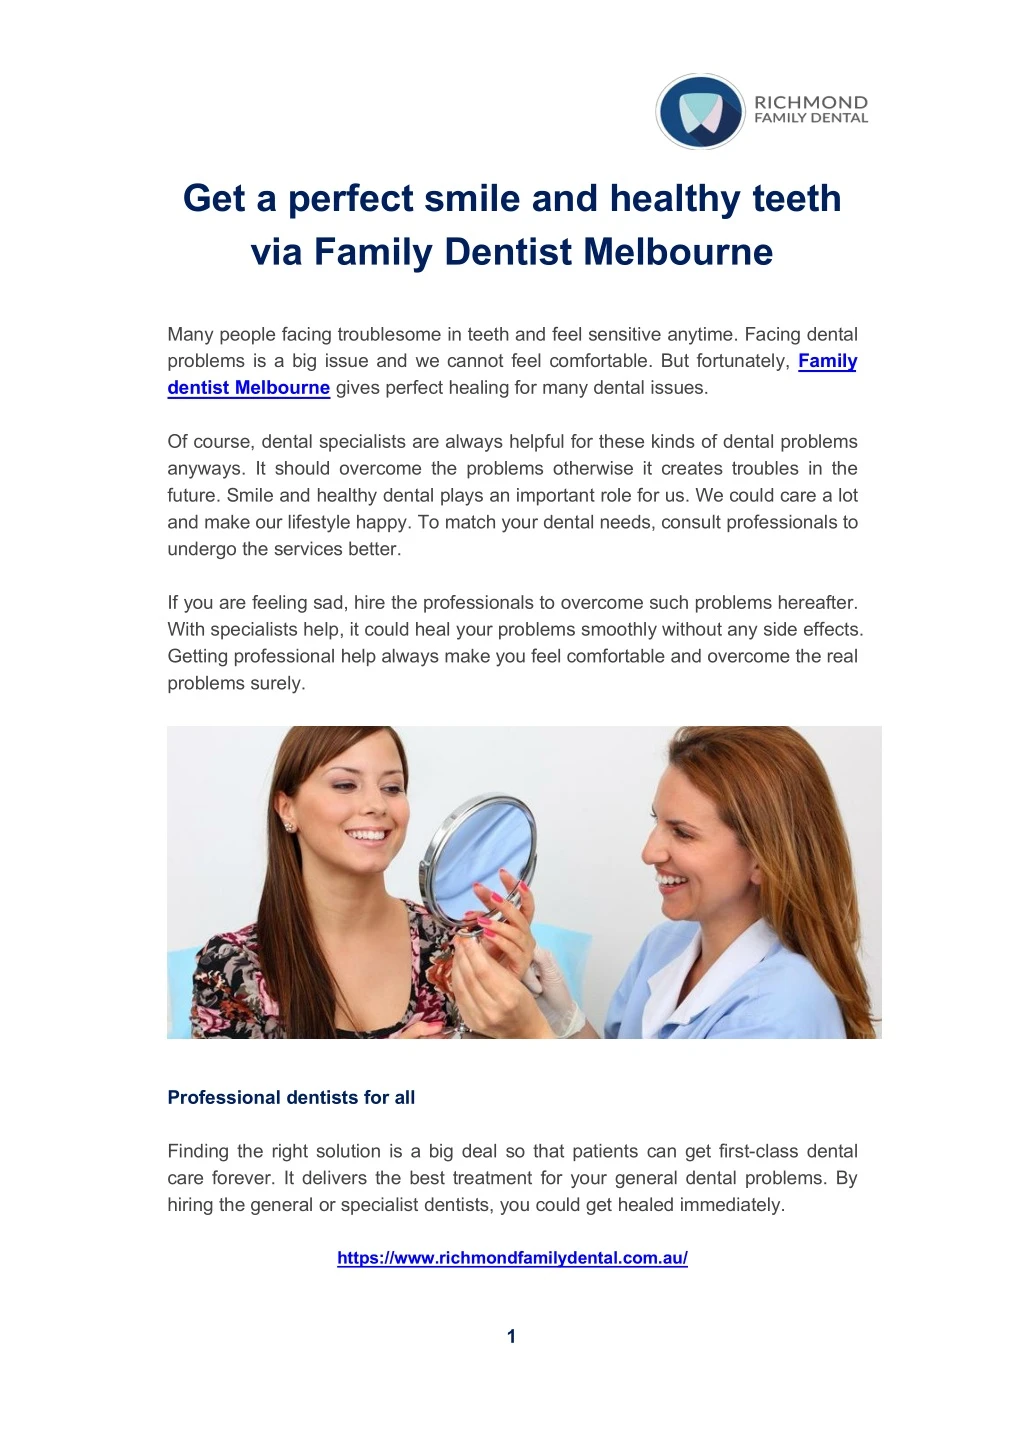 get a perfect smile and healthy teeth via family